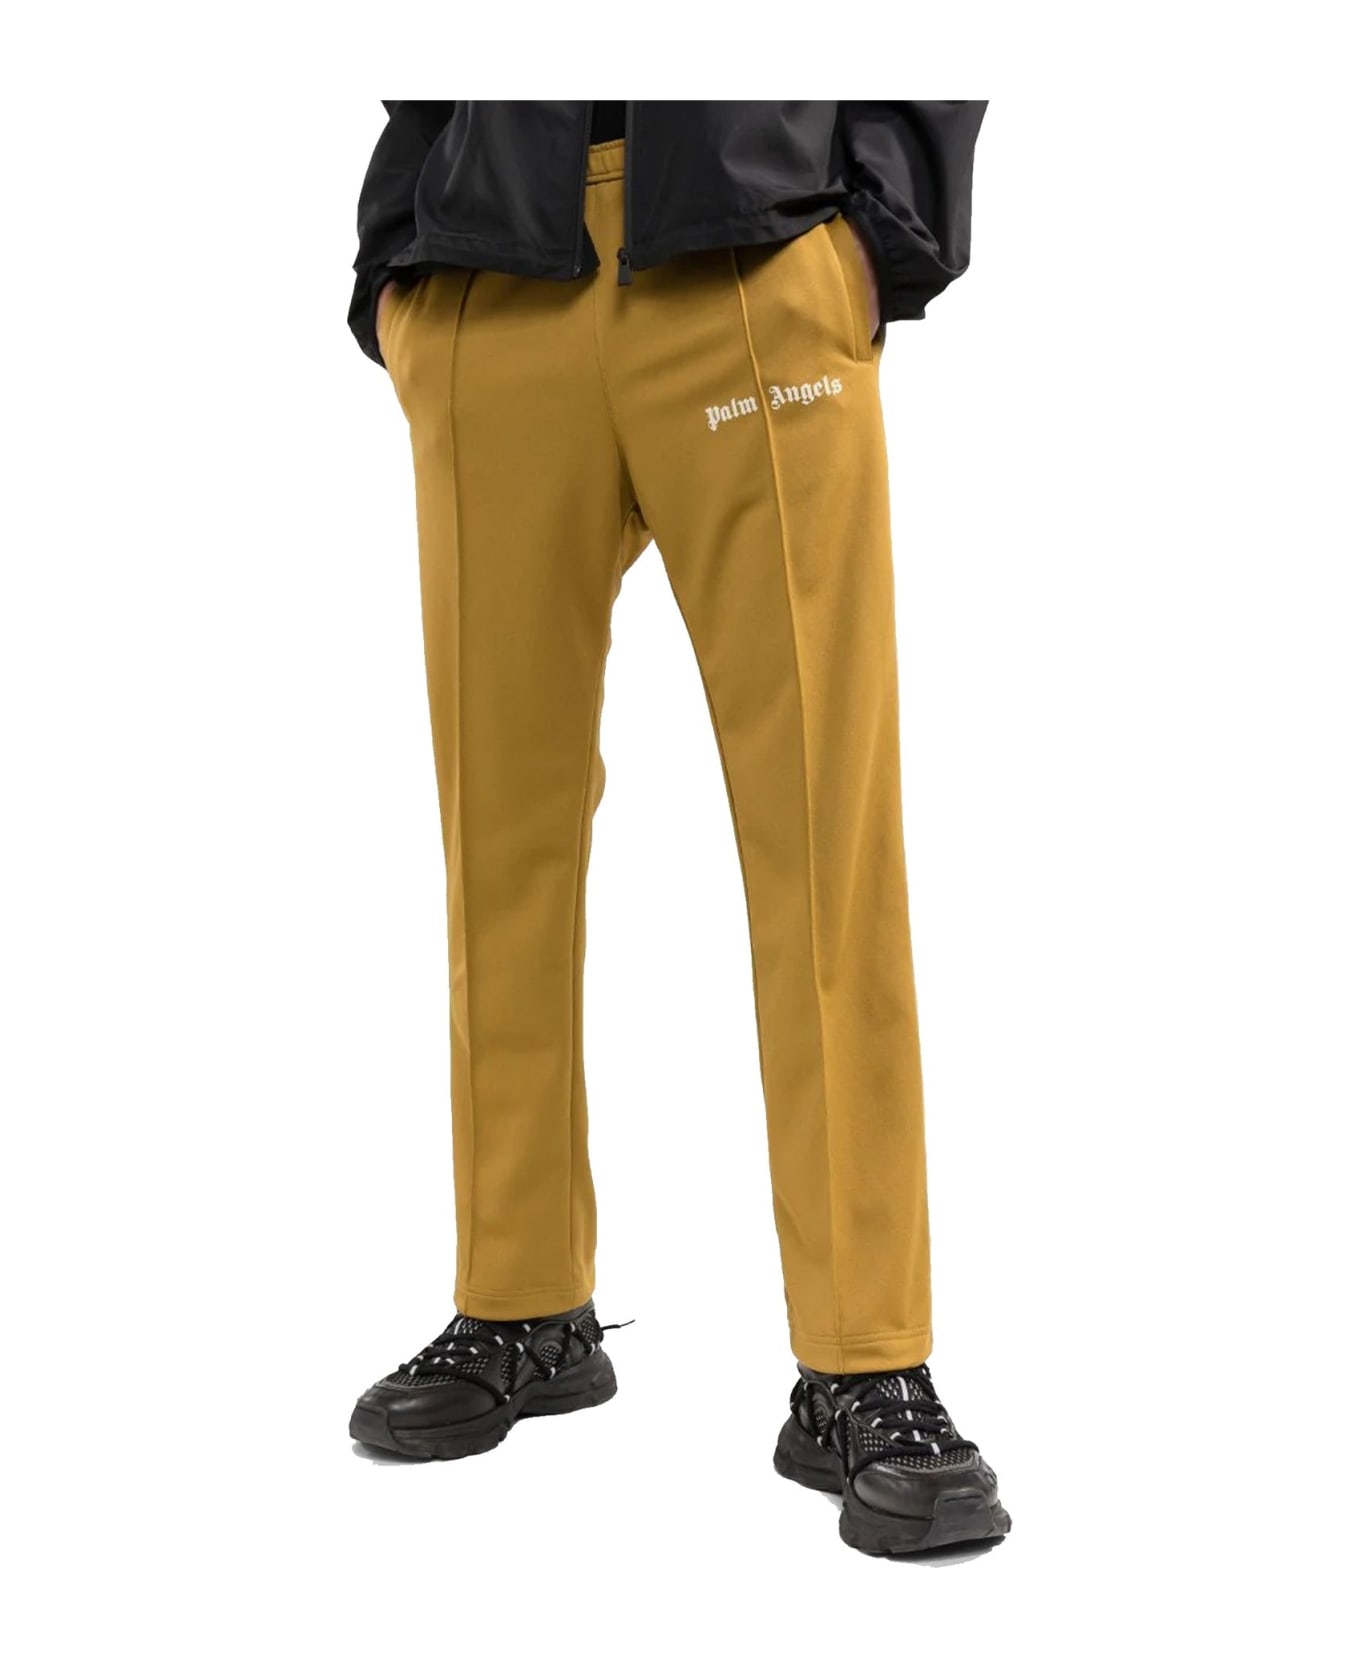 Palm Angels Track Pants - Yellow